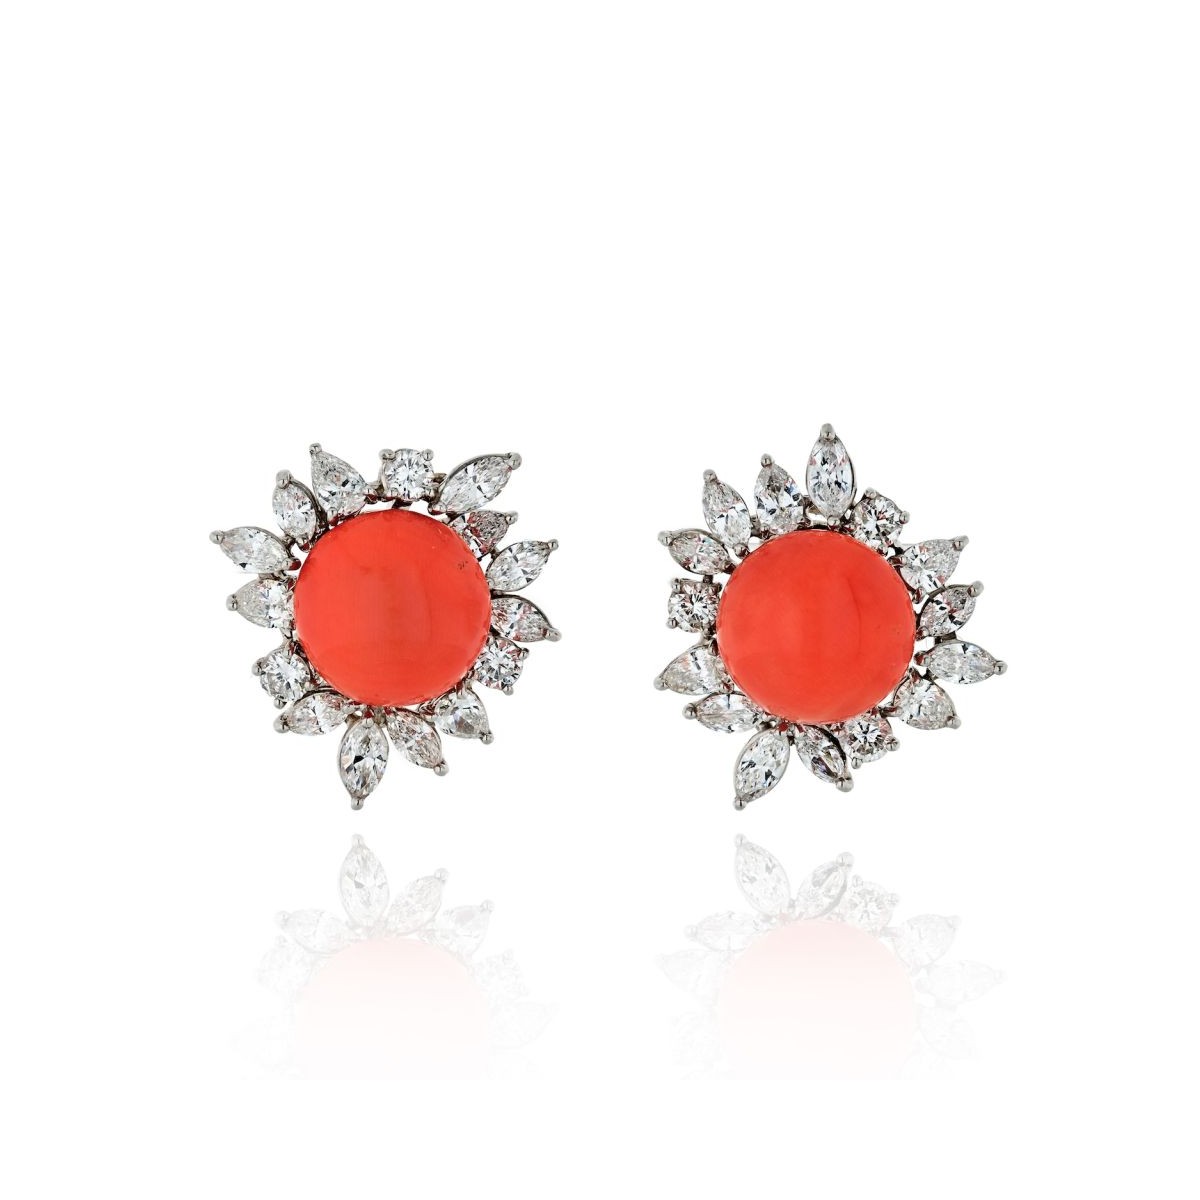 Diamond, Coral and Platinum Earrings